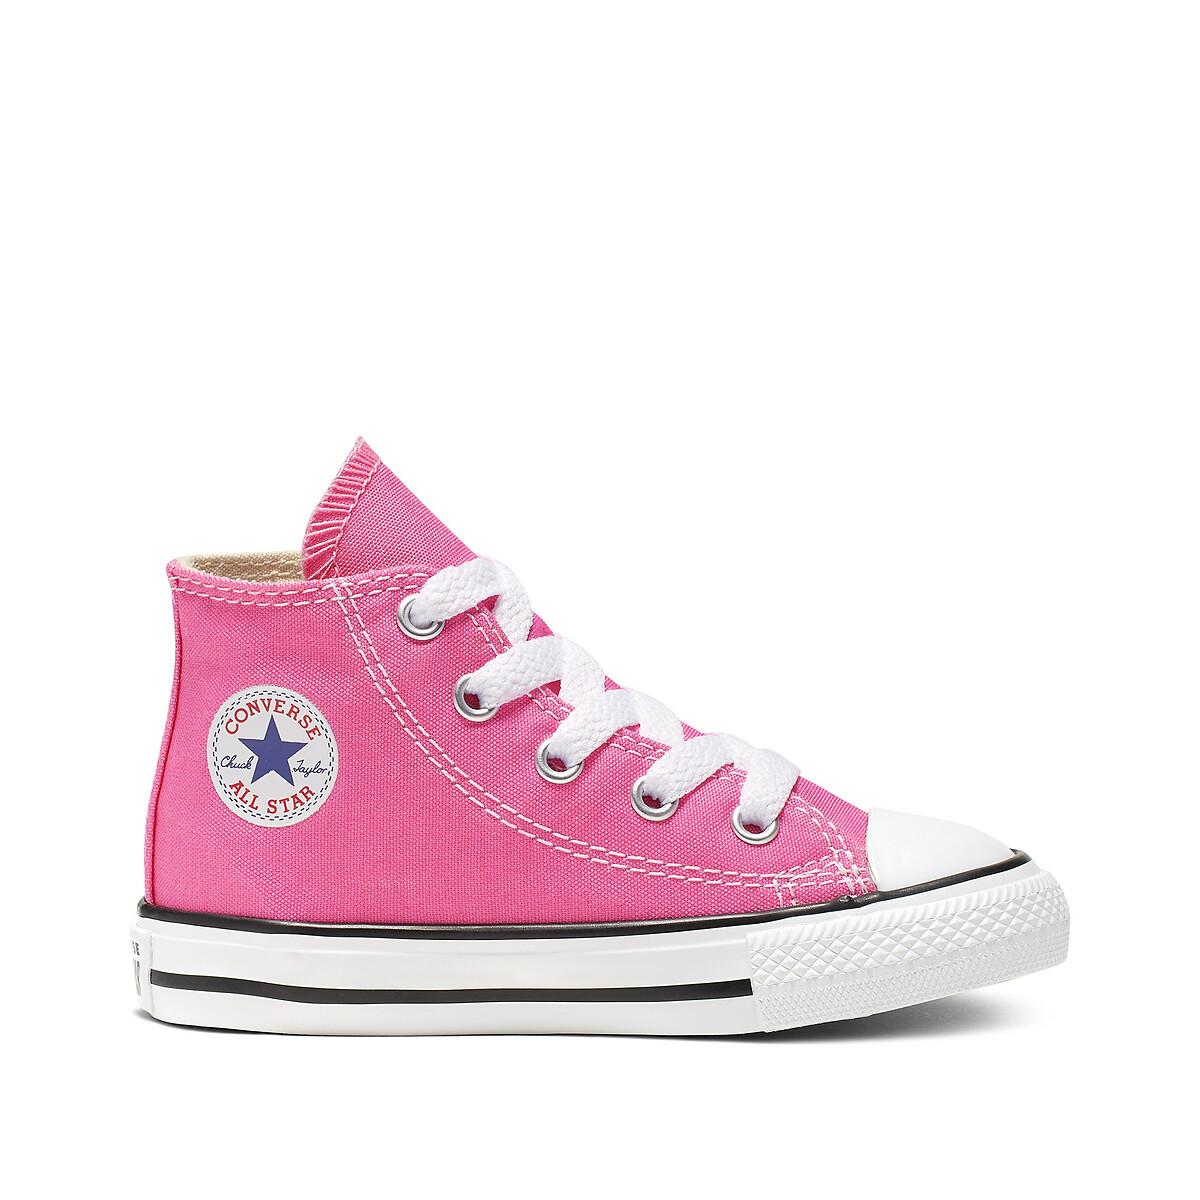 Kids chuck taylor all star core high trainers, Converse | La Redoute